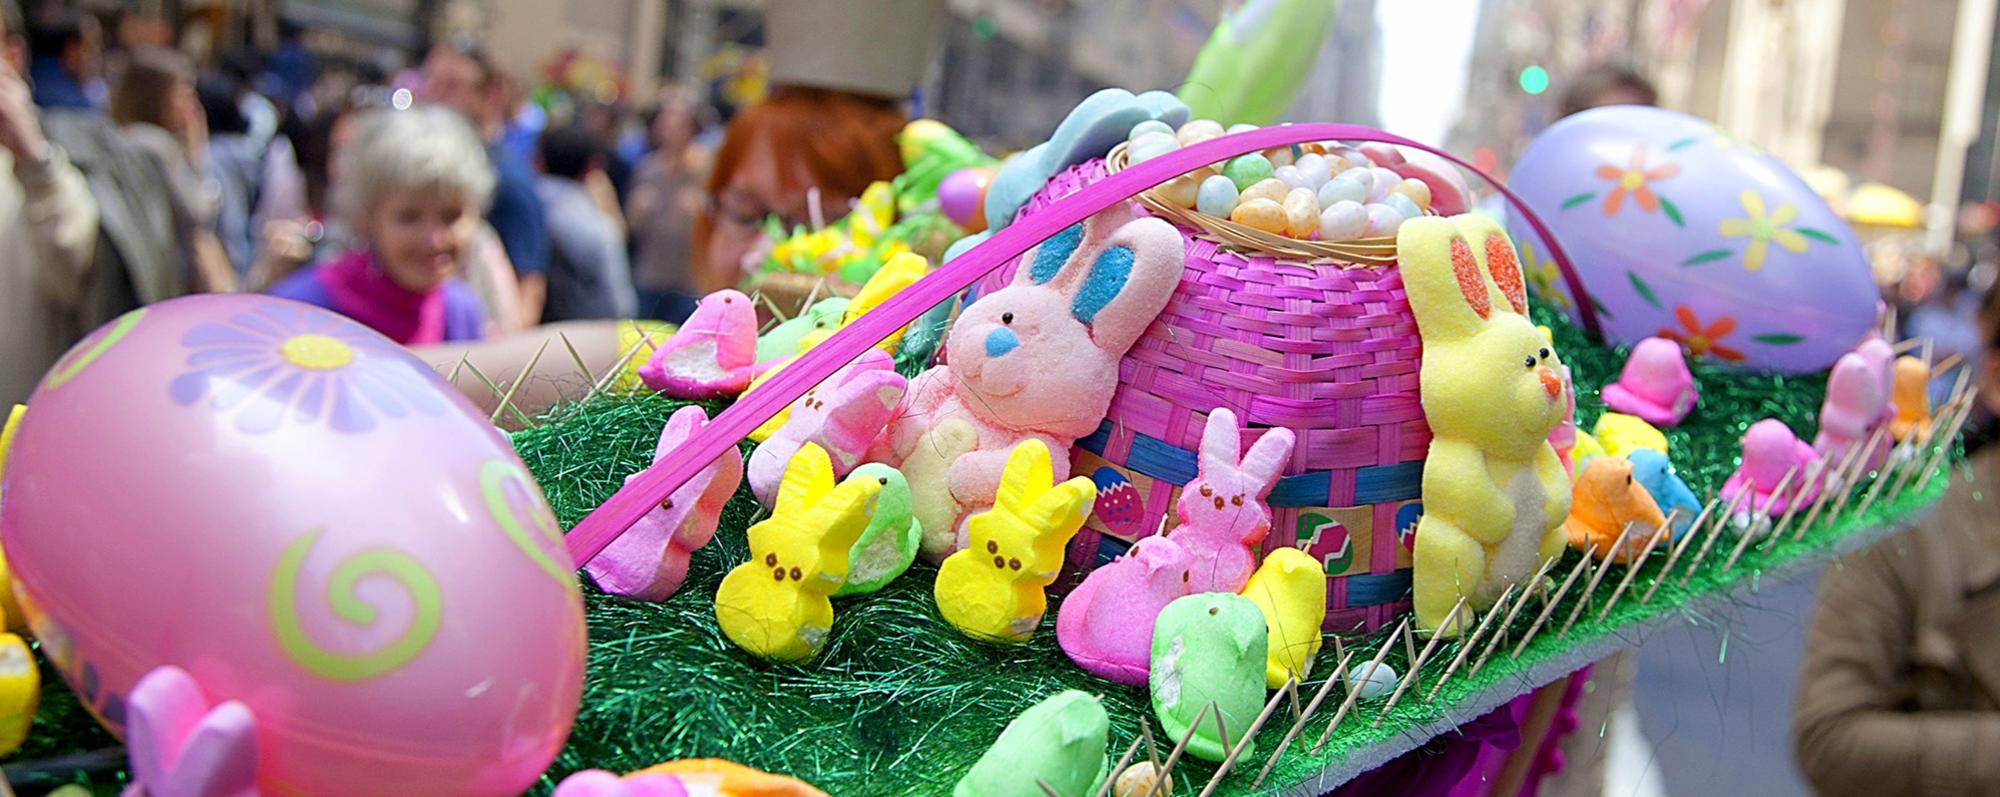 Easter Parade and Bonnet Festival in New York City